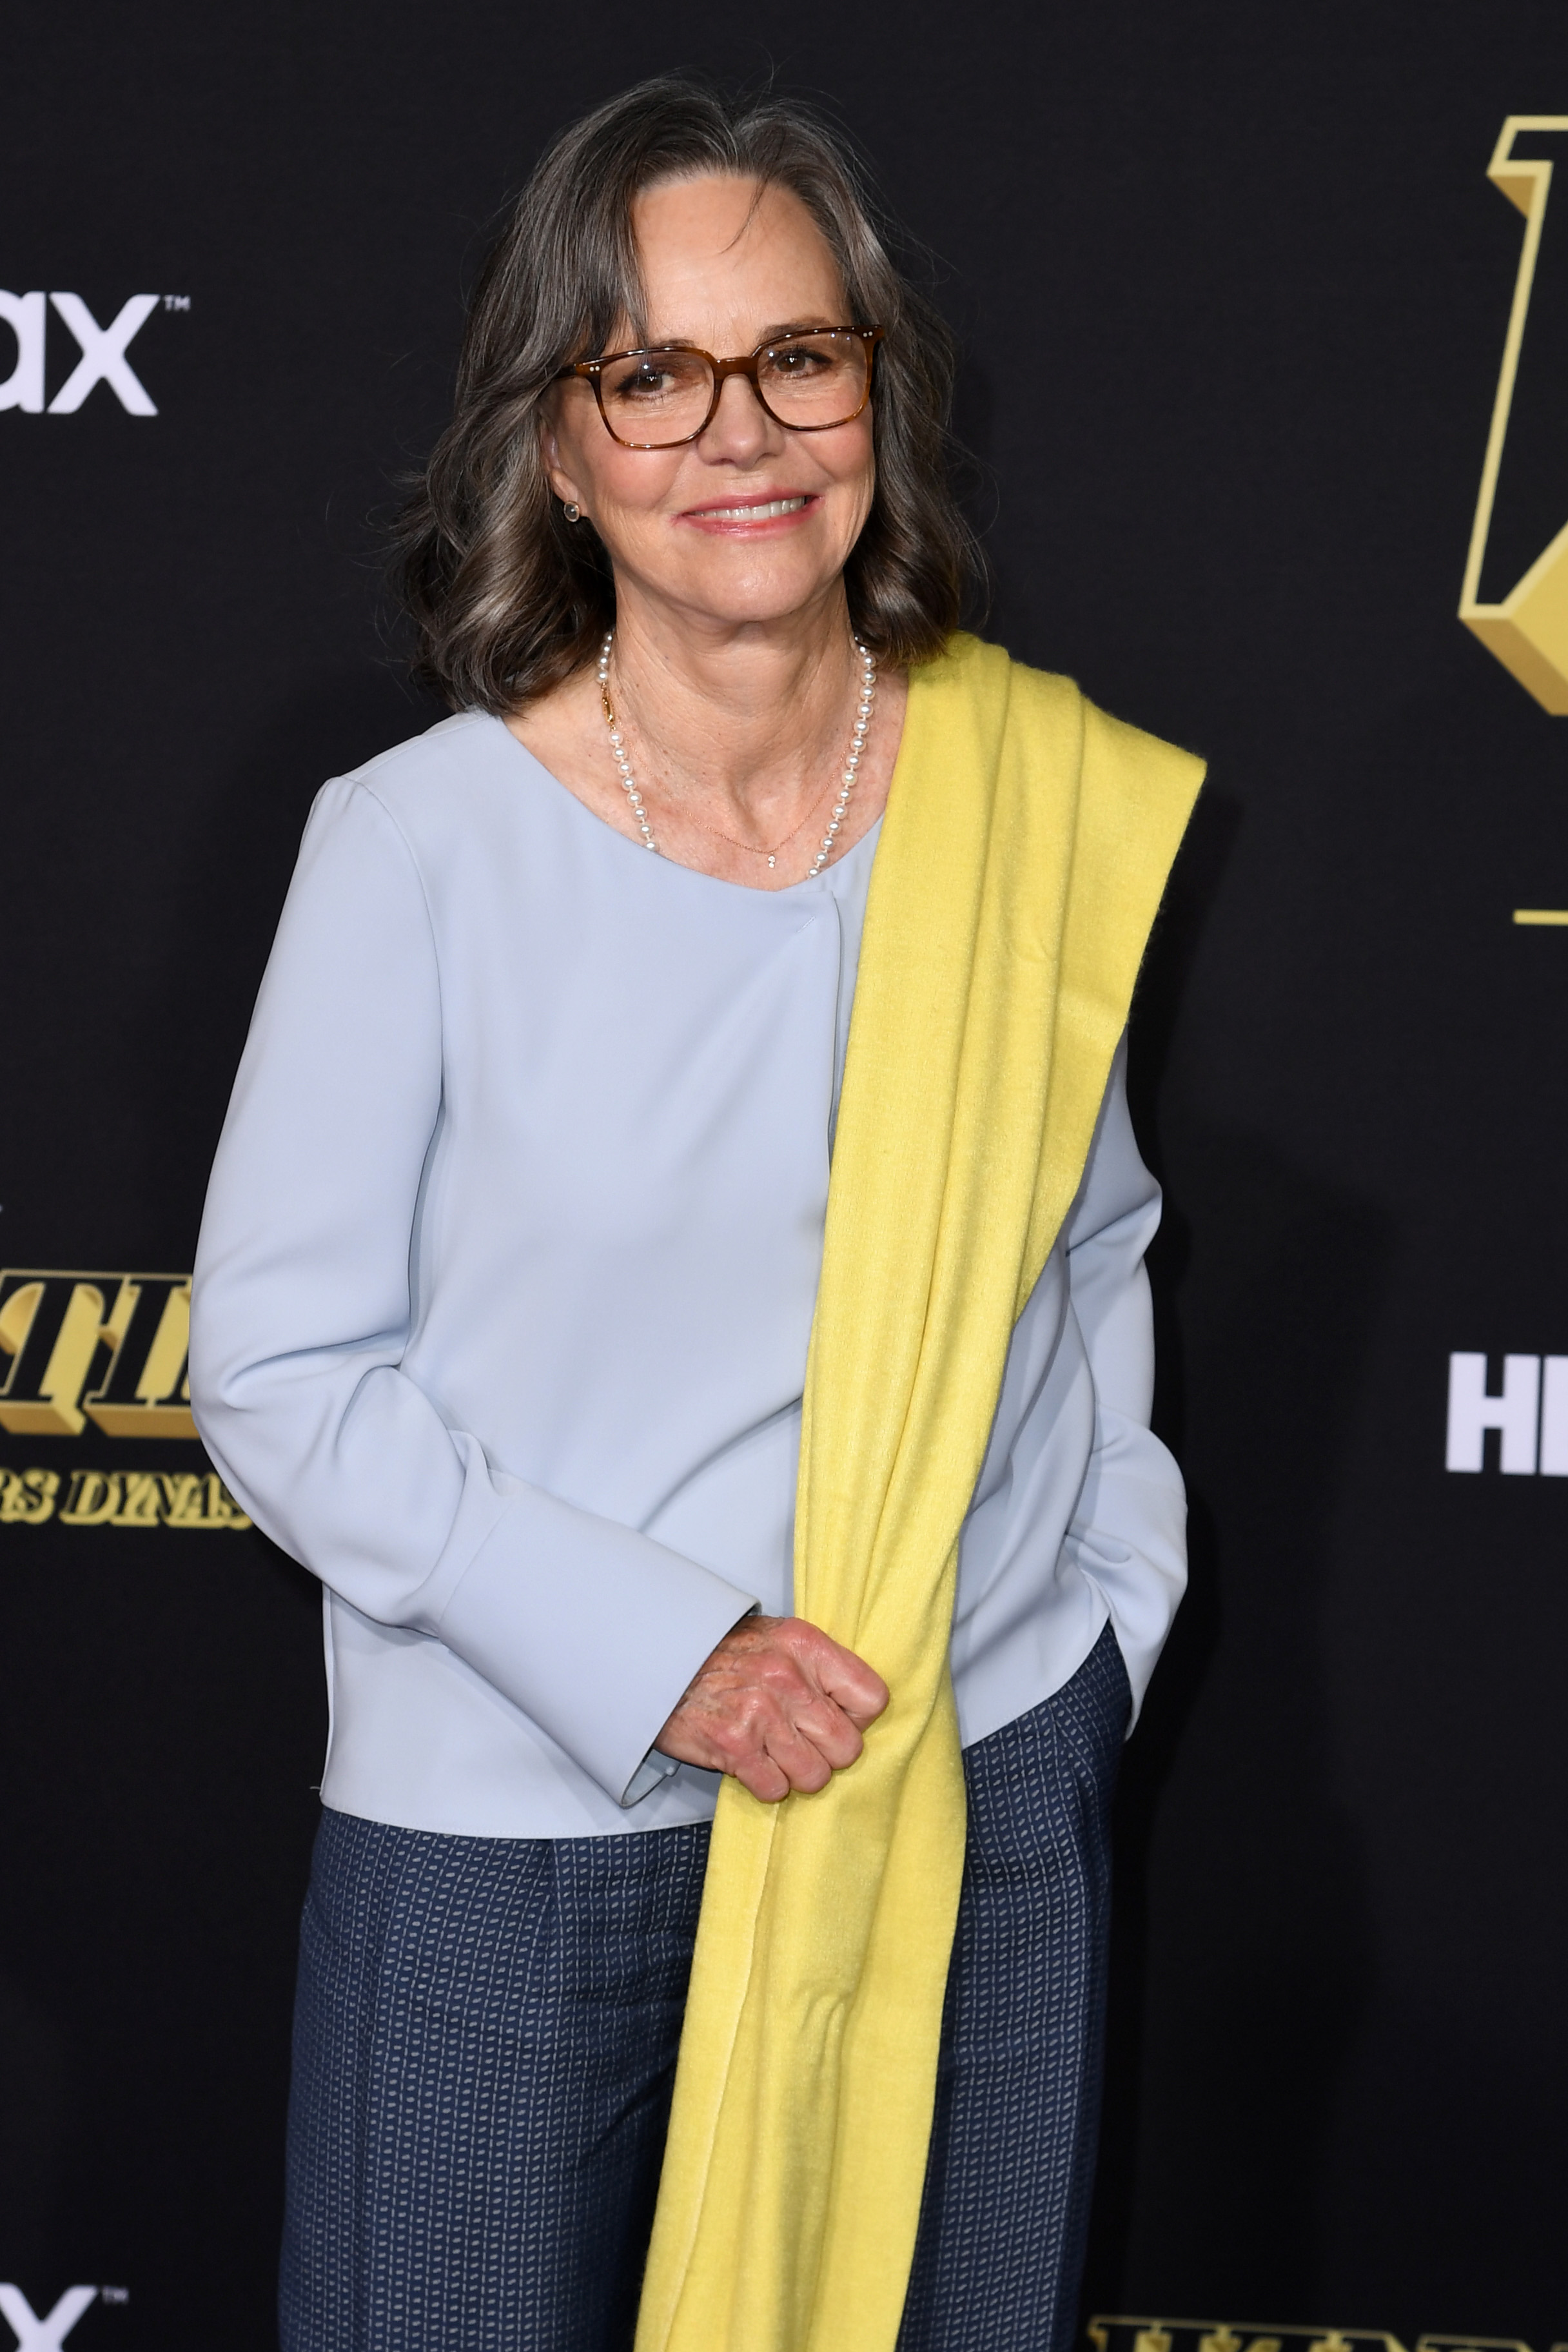 Sally Field at the "Winning Time: The Rise Of The Lakers Dynasty" HBO premiere in Los Angeles, 2022 | Source: Getty Images